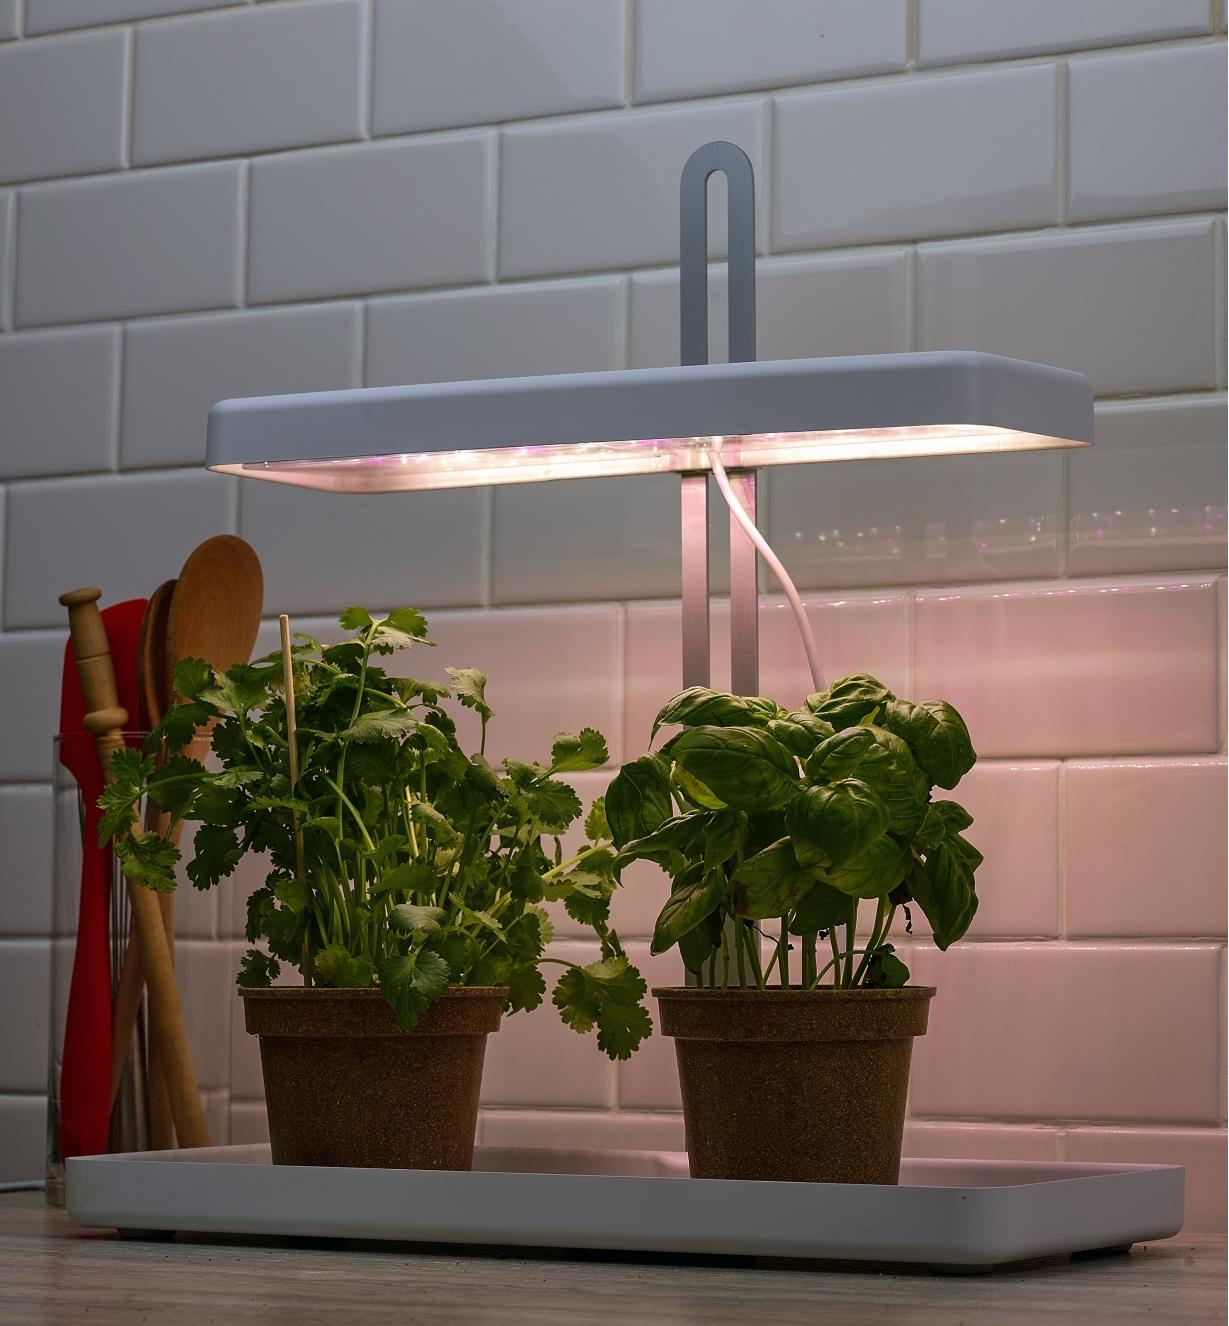 Two pots of herbs sit in the tray beneath the canopy of the tabletop LED grow light